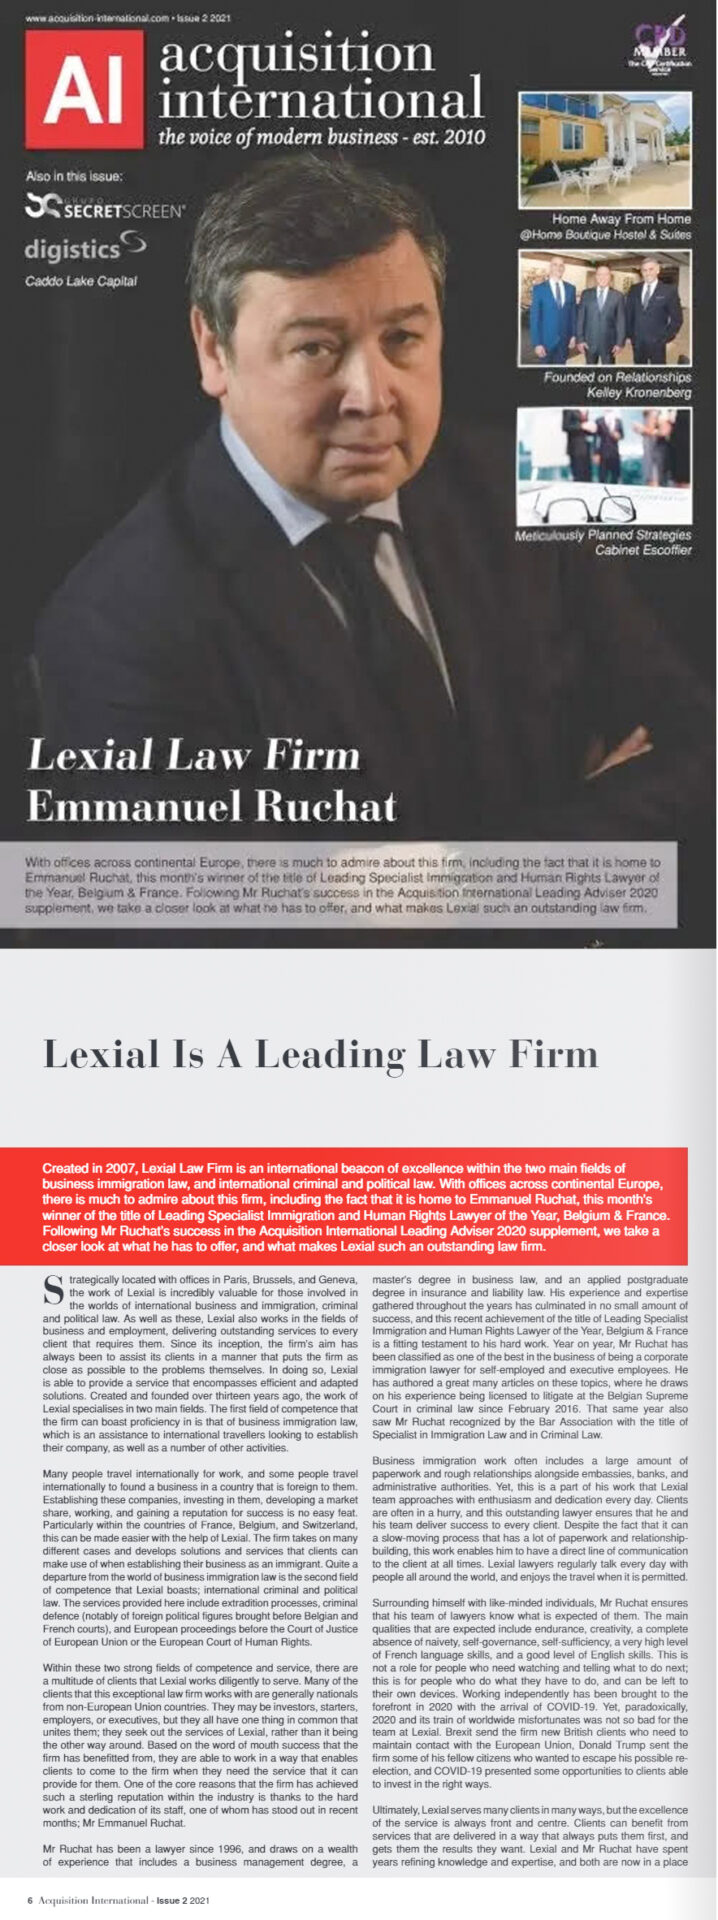 Lexial is a leading law firm by Acquisition International